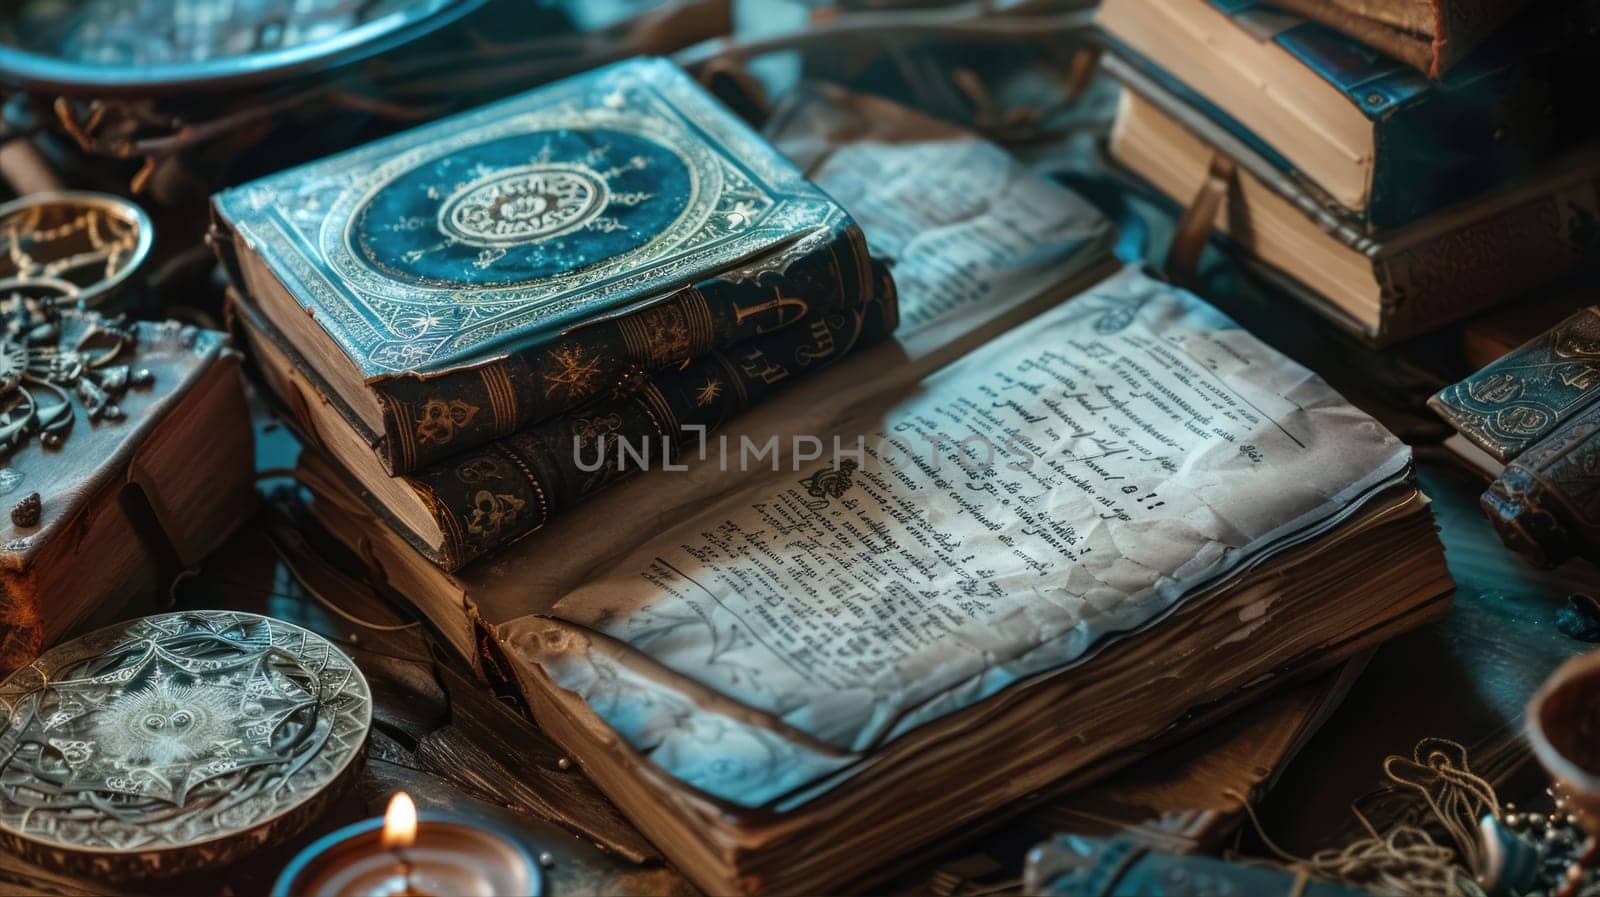 Grimoire arcana for enhancing magical abilities and skills by natali_brill